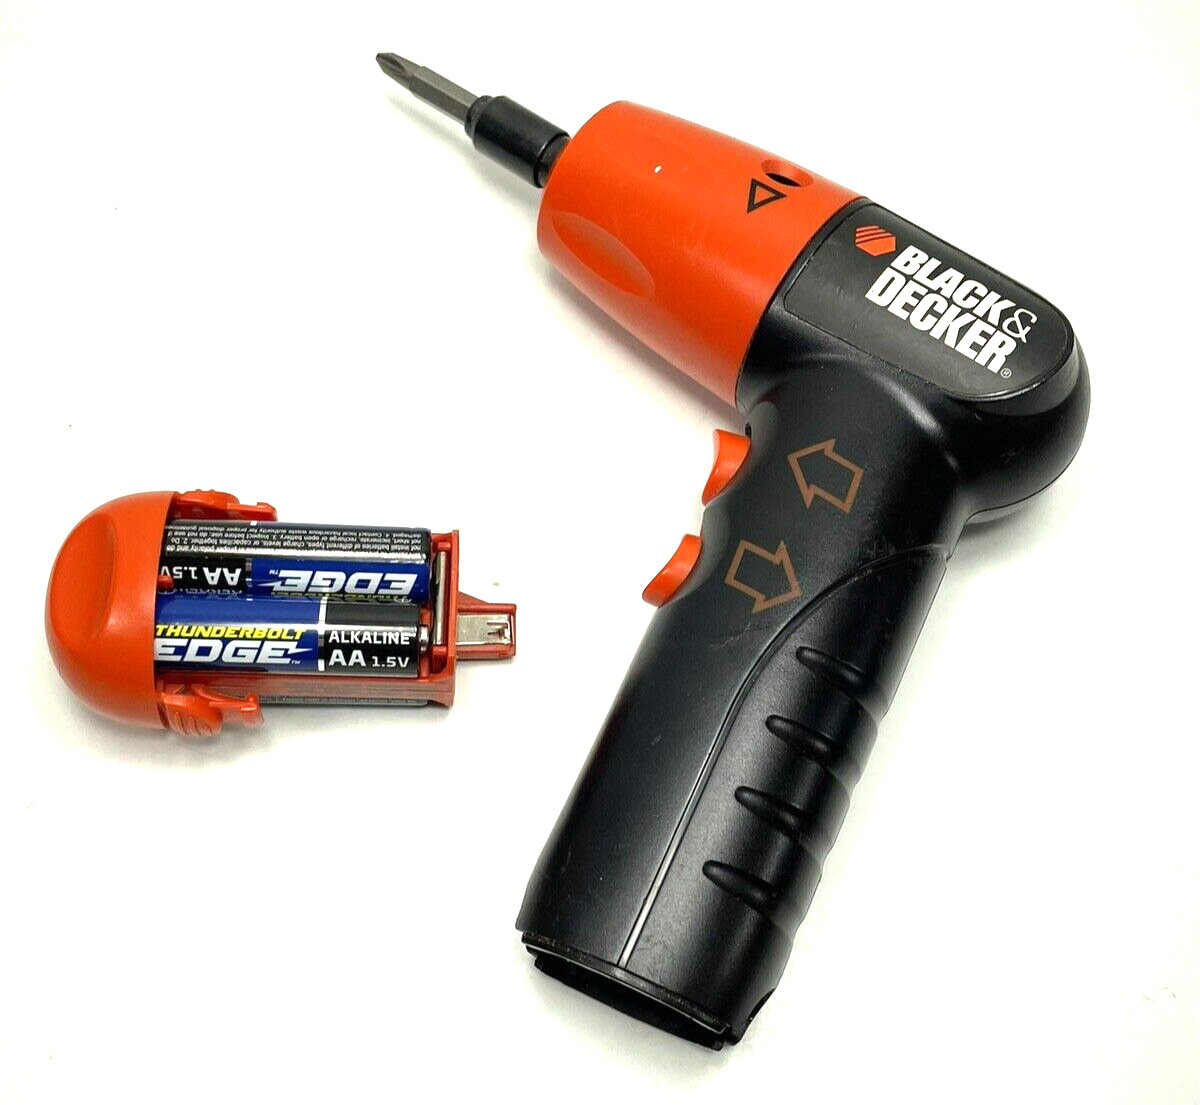 Black & Decker  Light Drill AD 600 Type 1 Battery Operated For Home Repairs Use